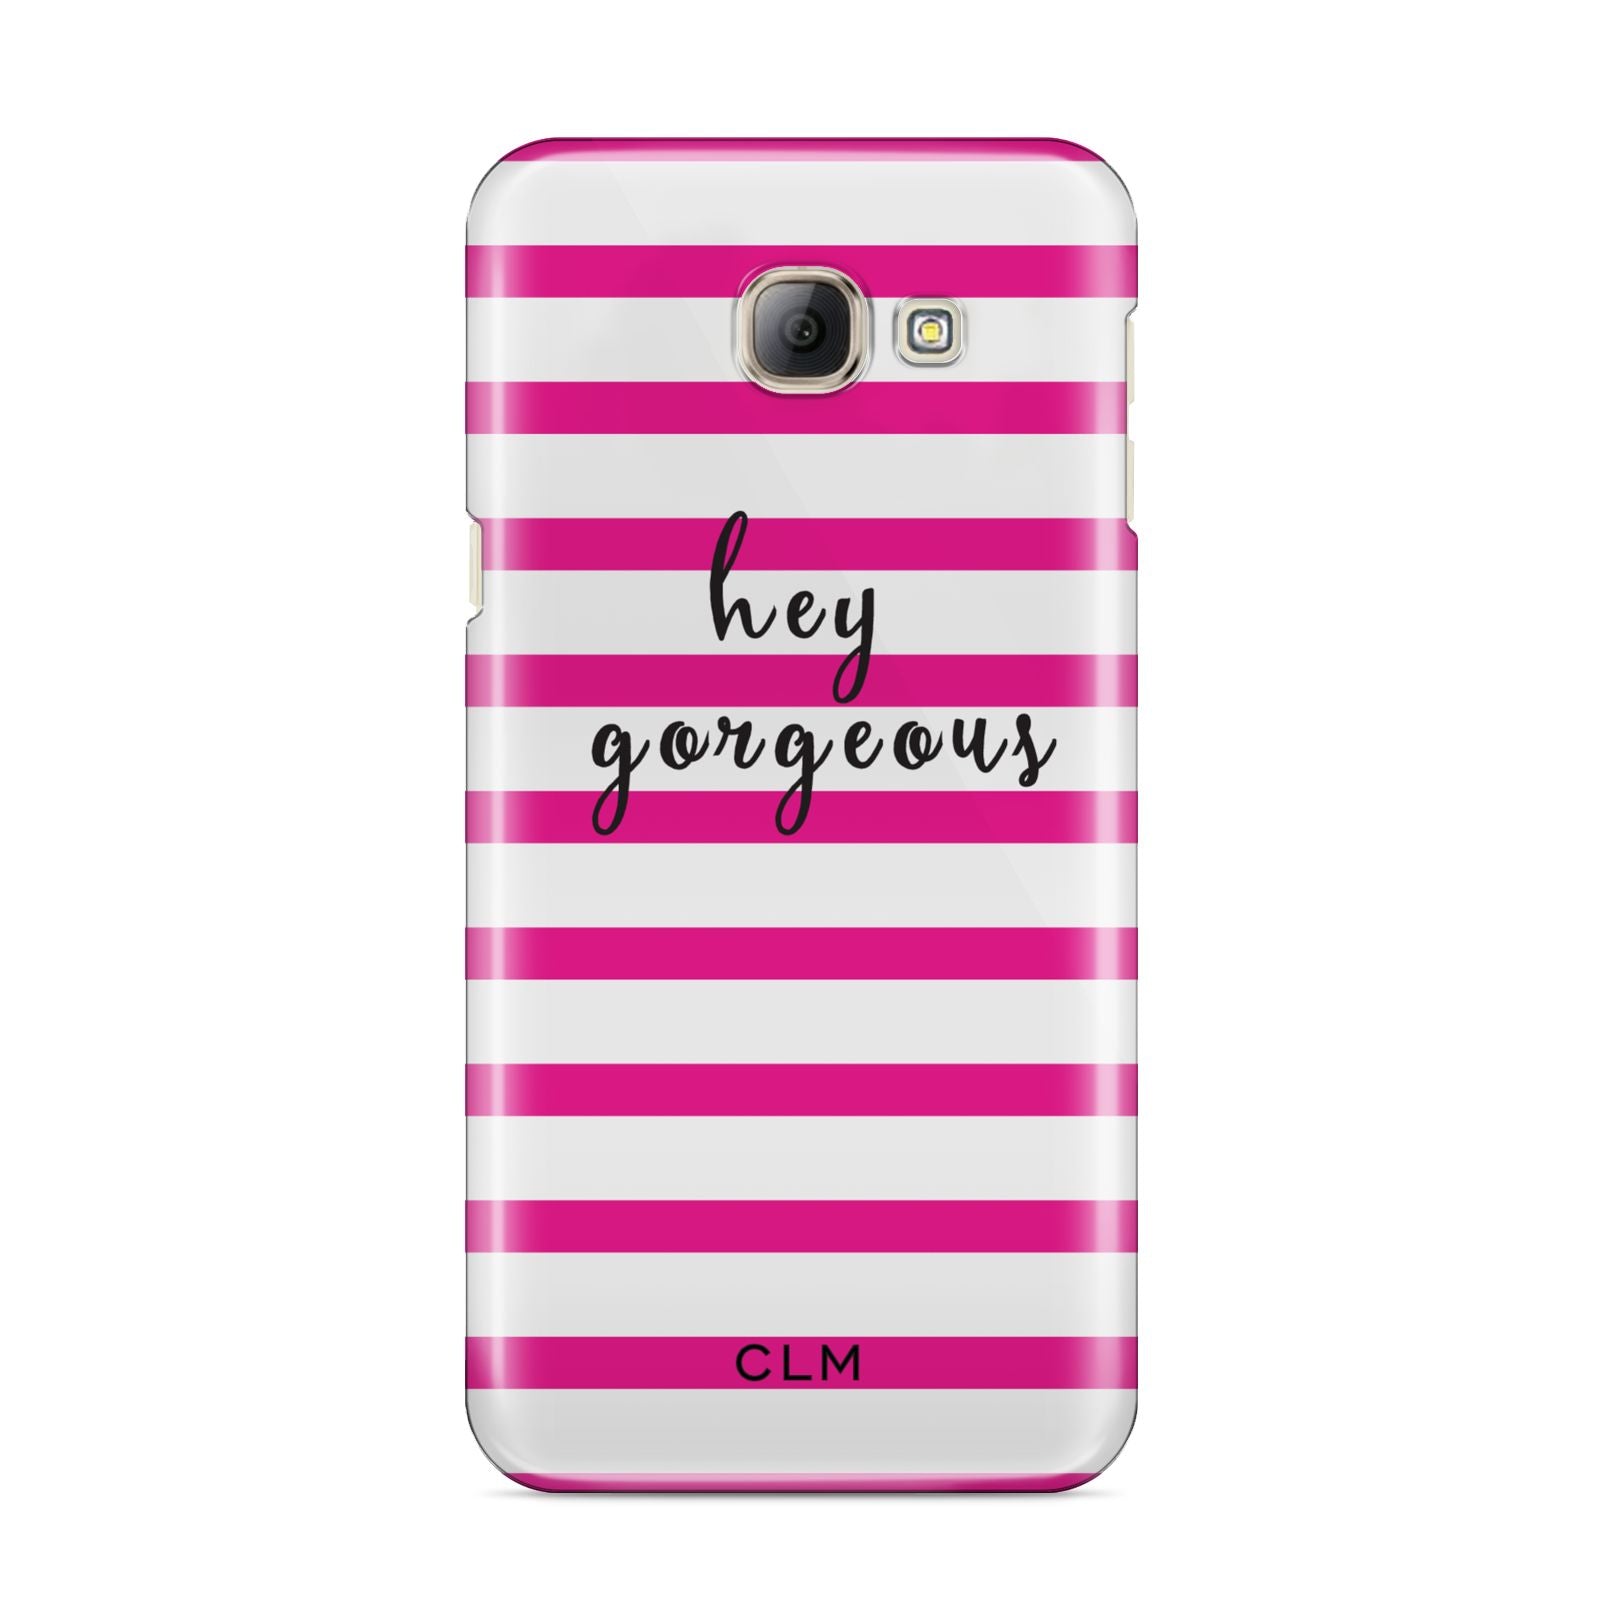 Personalised Initials Pink Striped Samsung Galaxy A8 2016 Case